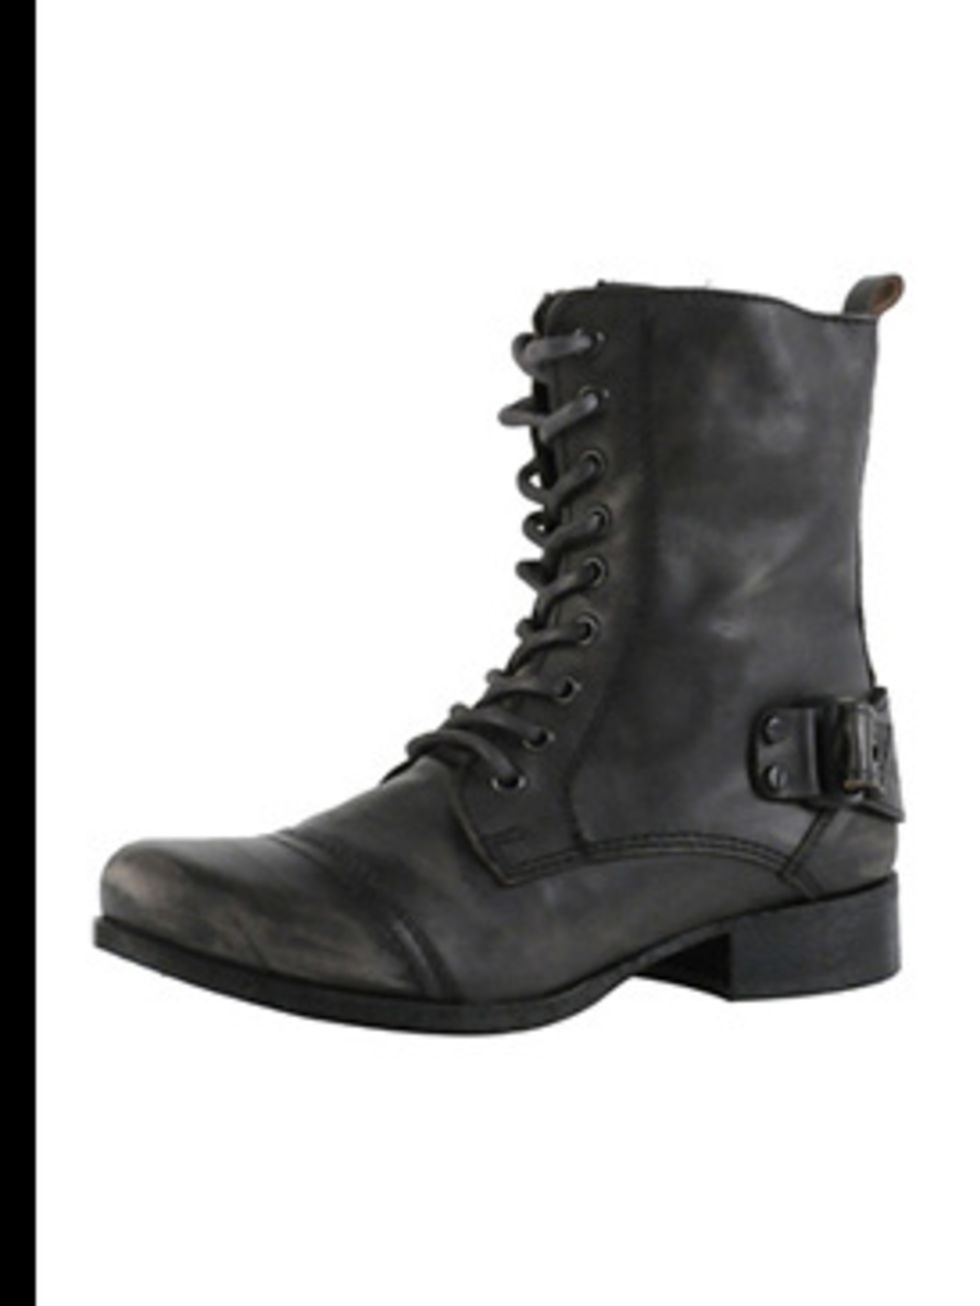 <p>Lace up boots, £64.99, by <a href="http://xml.riverisland.com/flash/content.php">River Island</a></p>